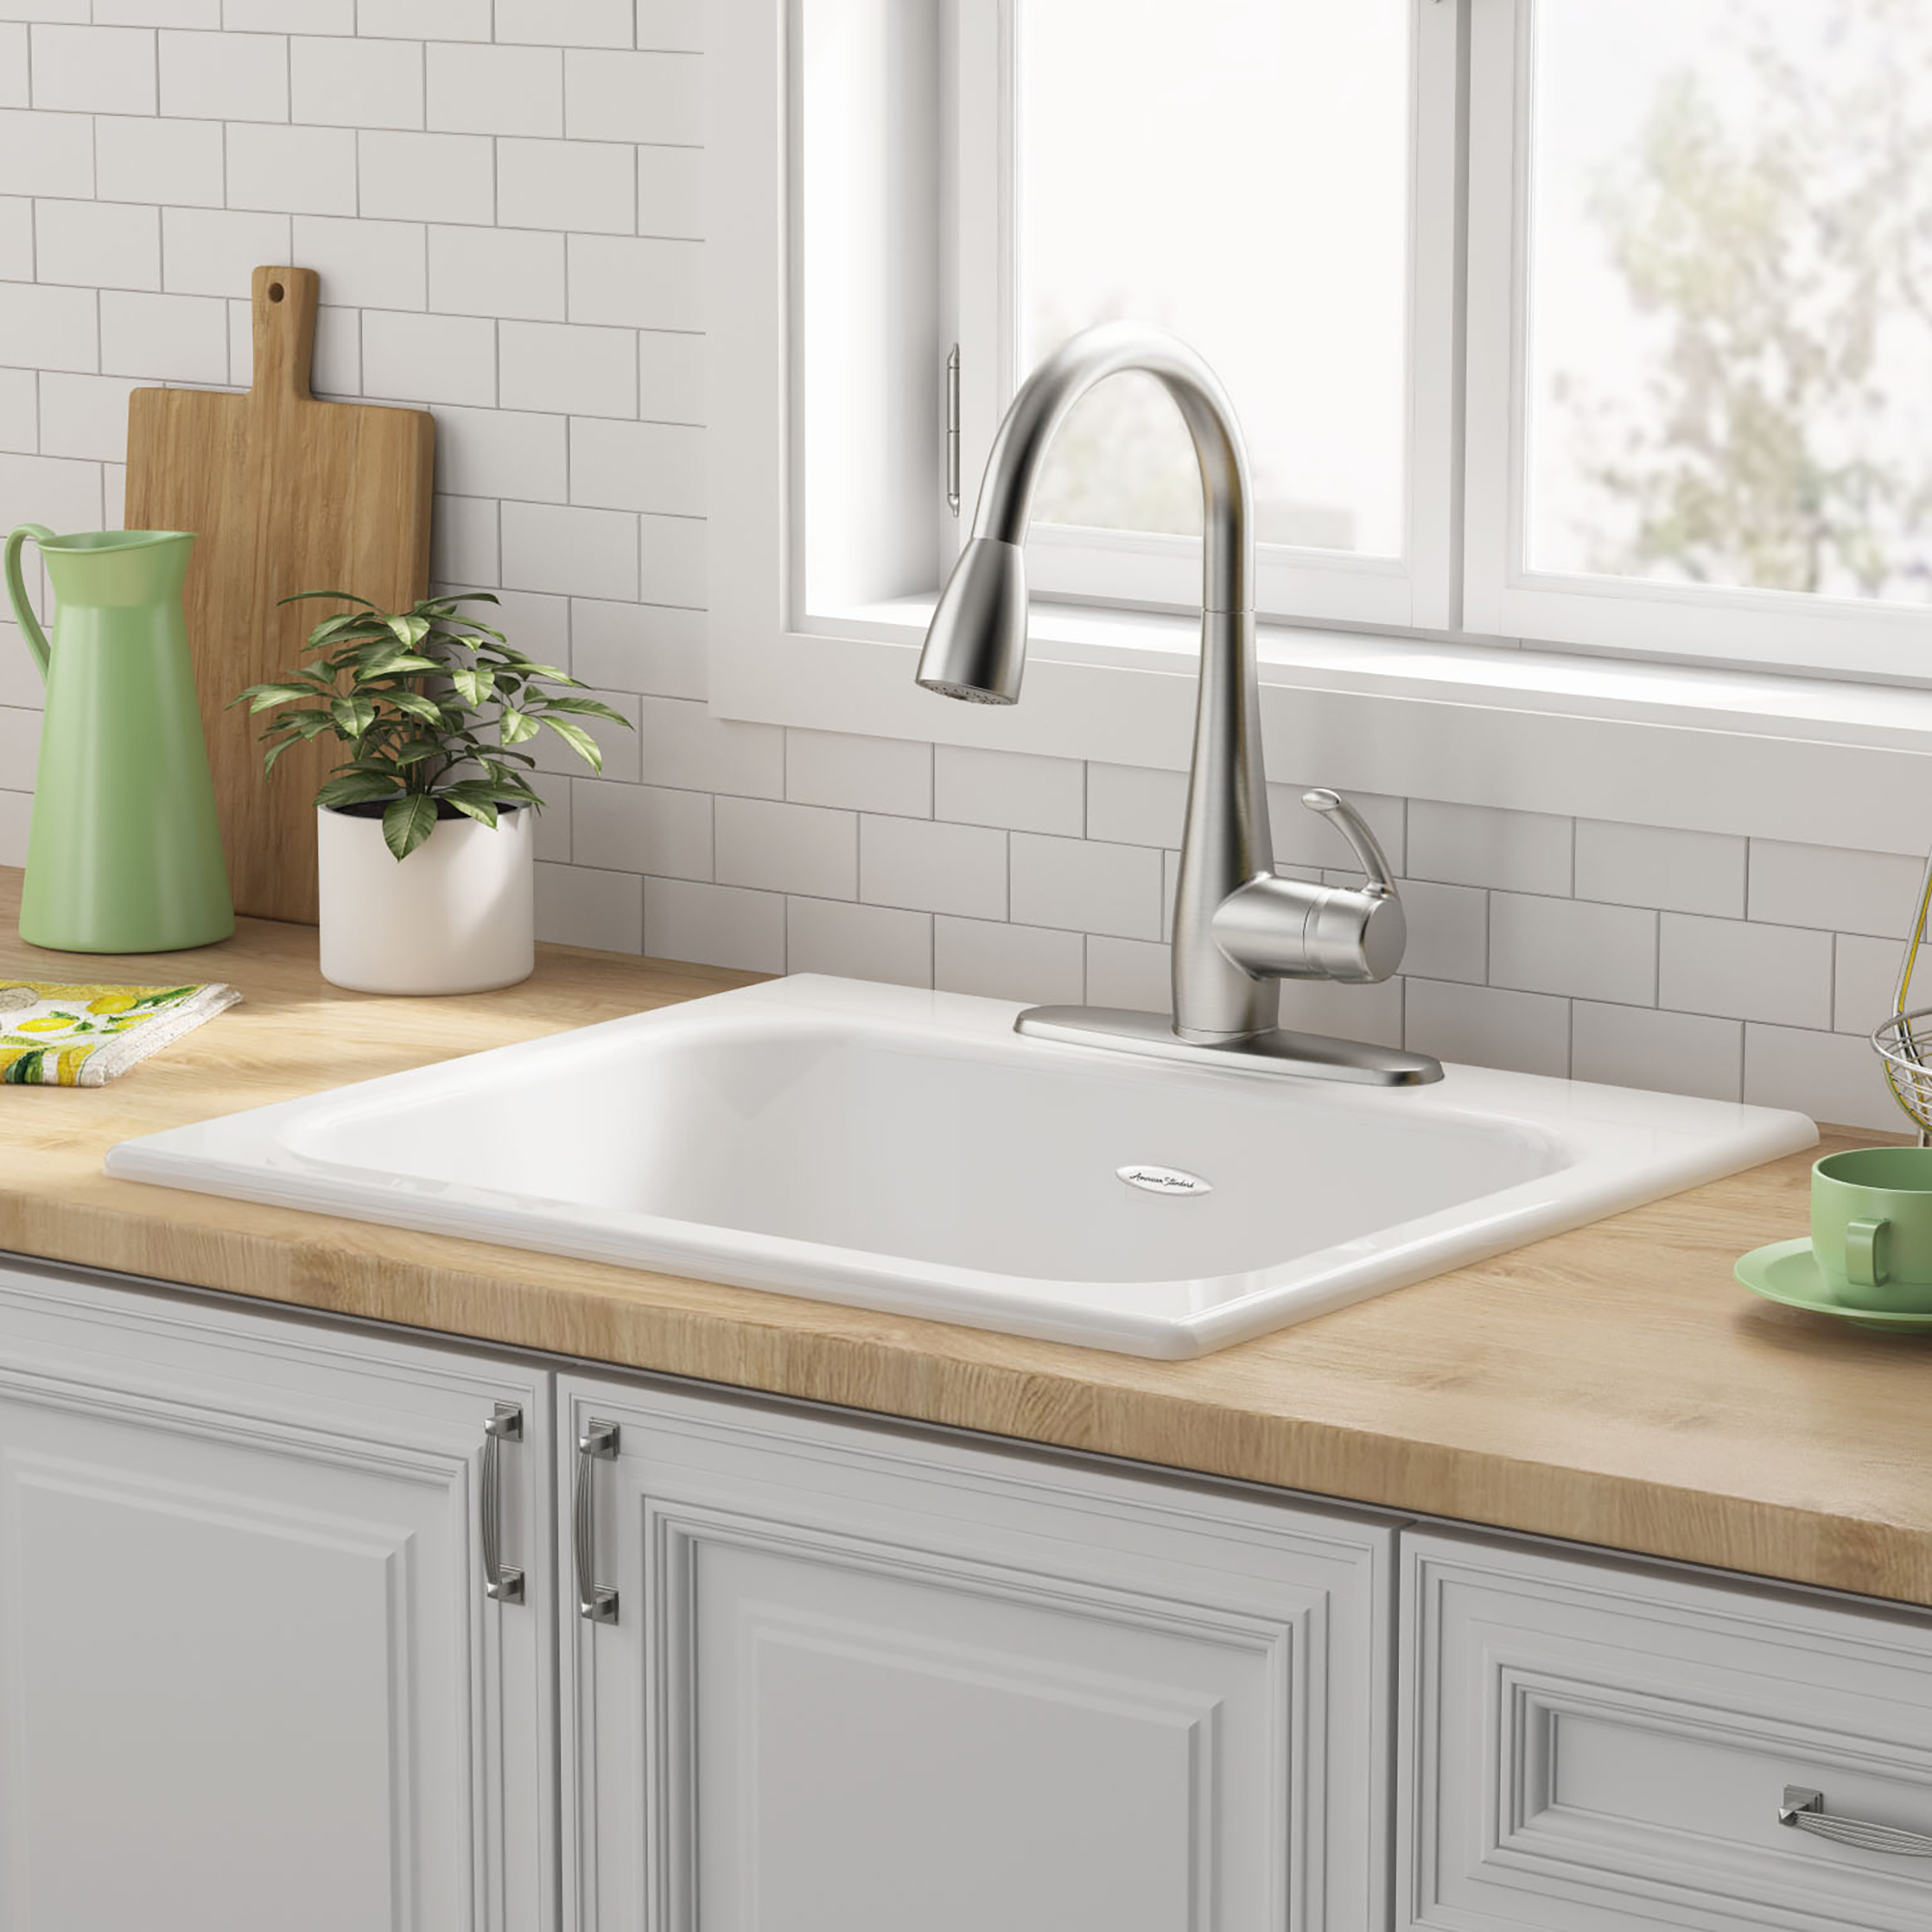 American Standard Quince Drop-in Cast Iron 25 in. 3-Hole Single Bowl Kitchen Sink in Brilliant White - image 5 of 6